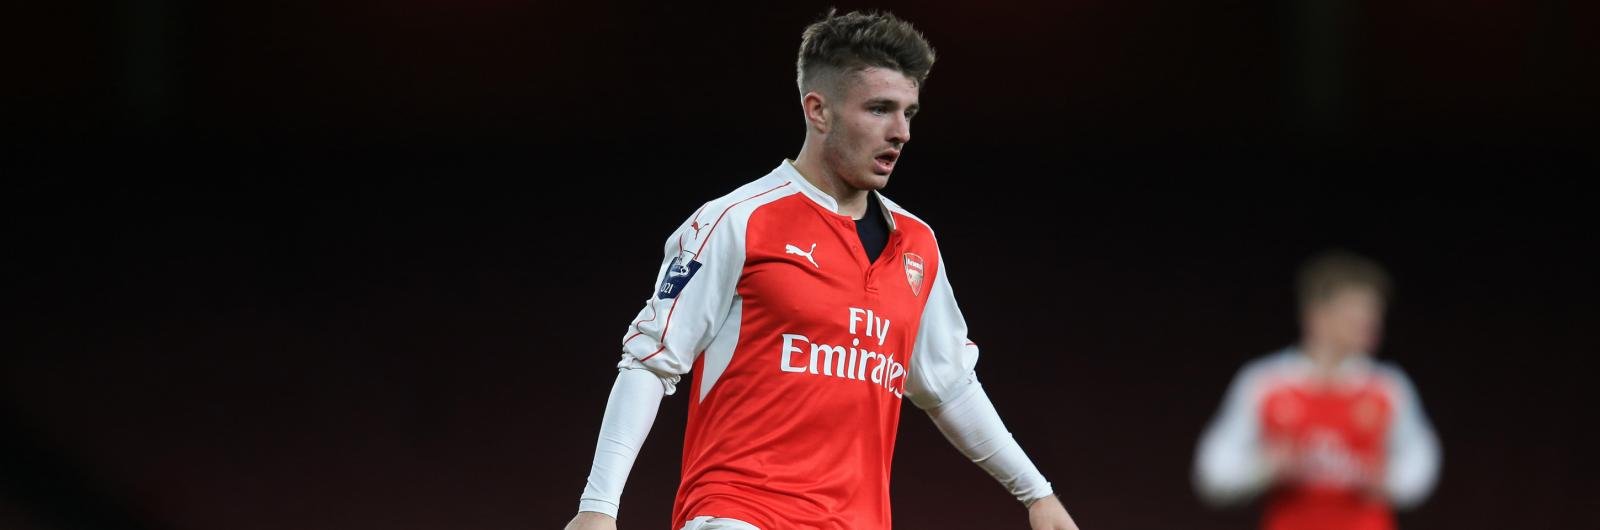 Arsenal’s 19-year-old starlet set to terminate loan deal